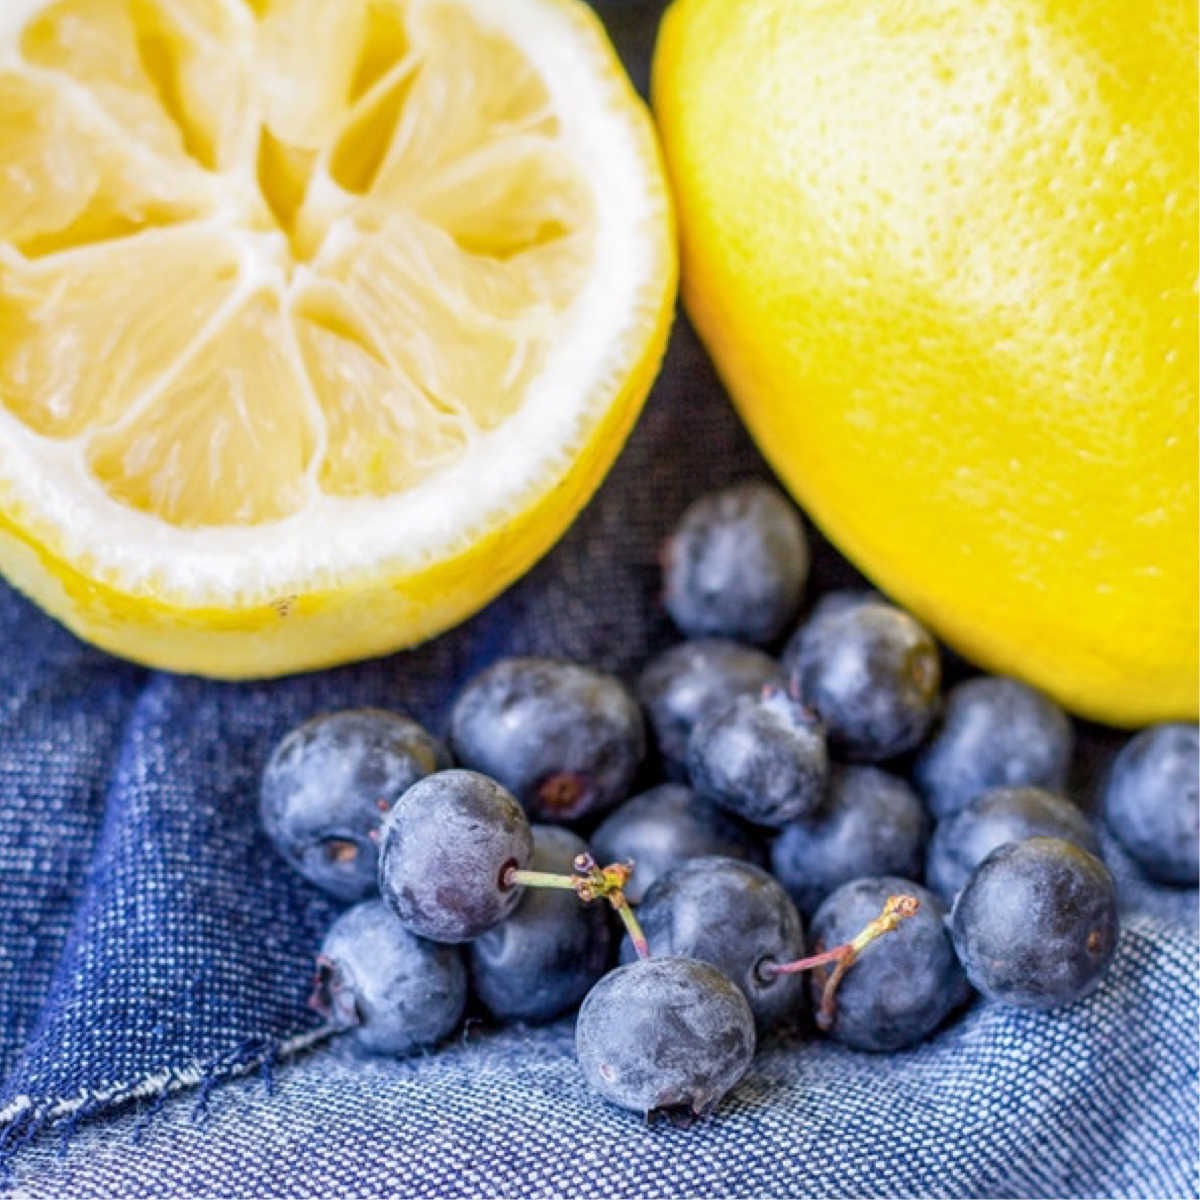 Close-up of blueberries and two halves of an orange on a jeans fabric